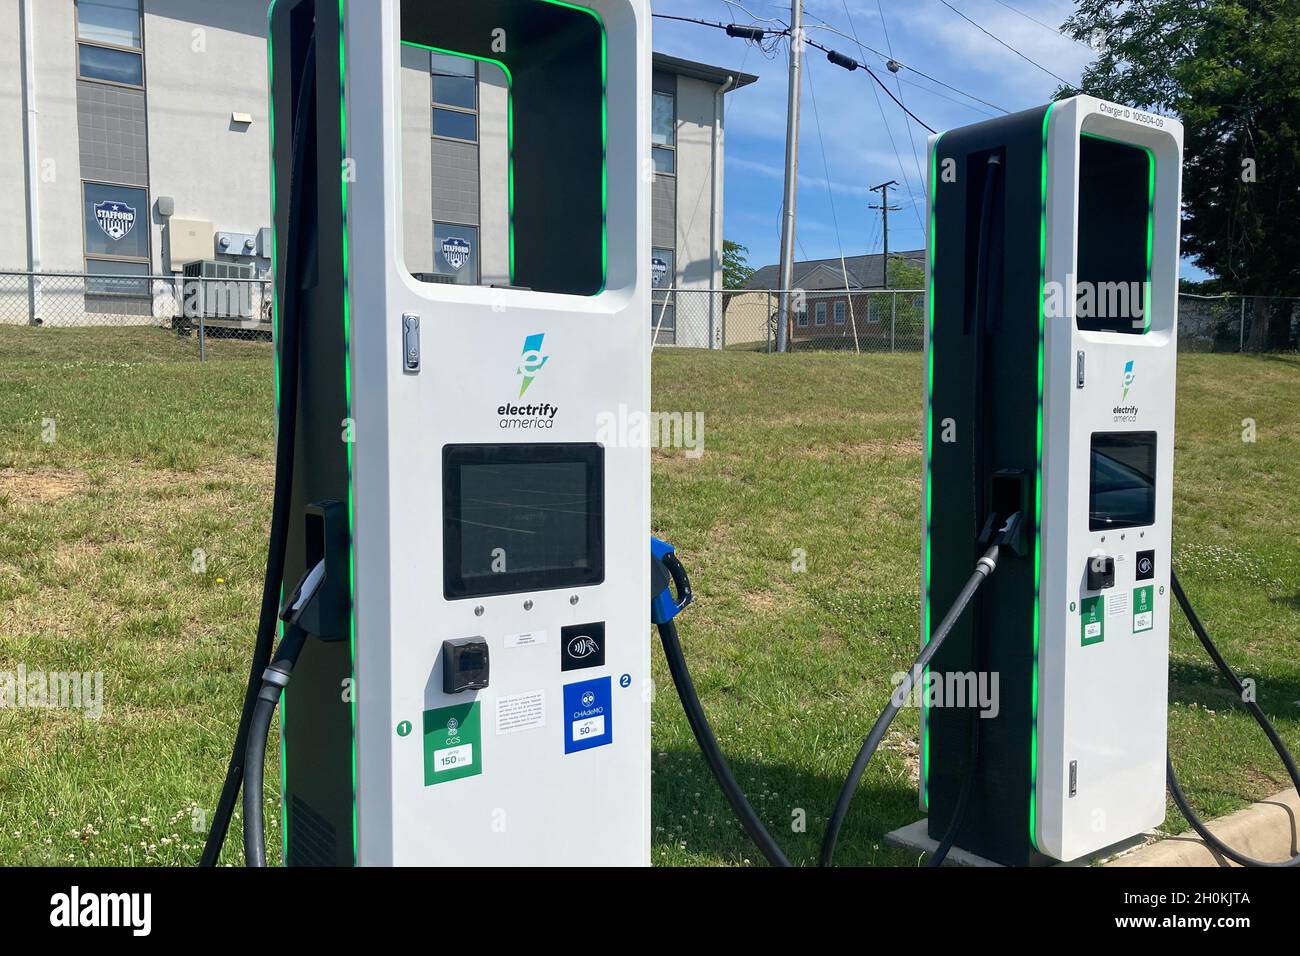 High Speed DC Fast Charging Stations For Electric Vehicles By Electrify America 150 and 350 Kilowatt Charging Stock Photo